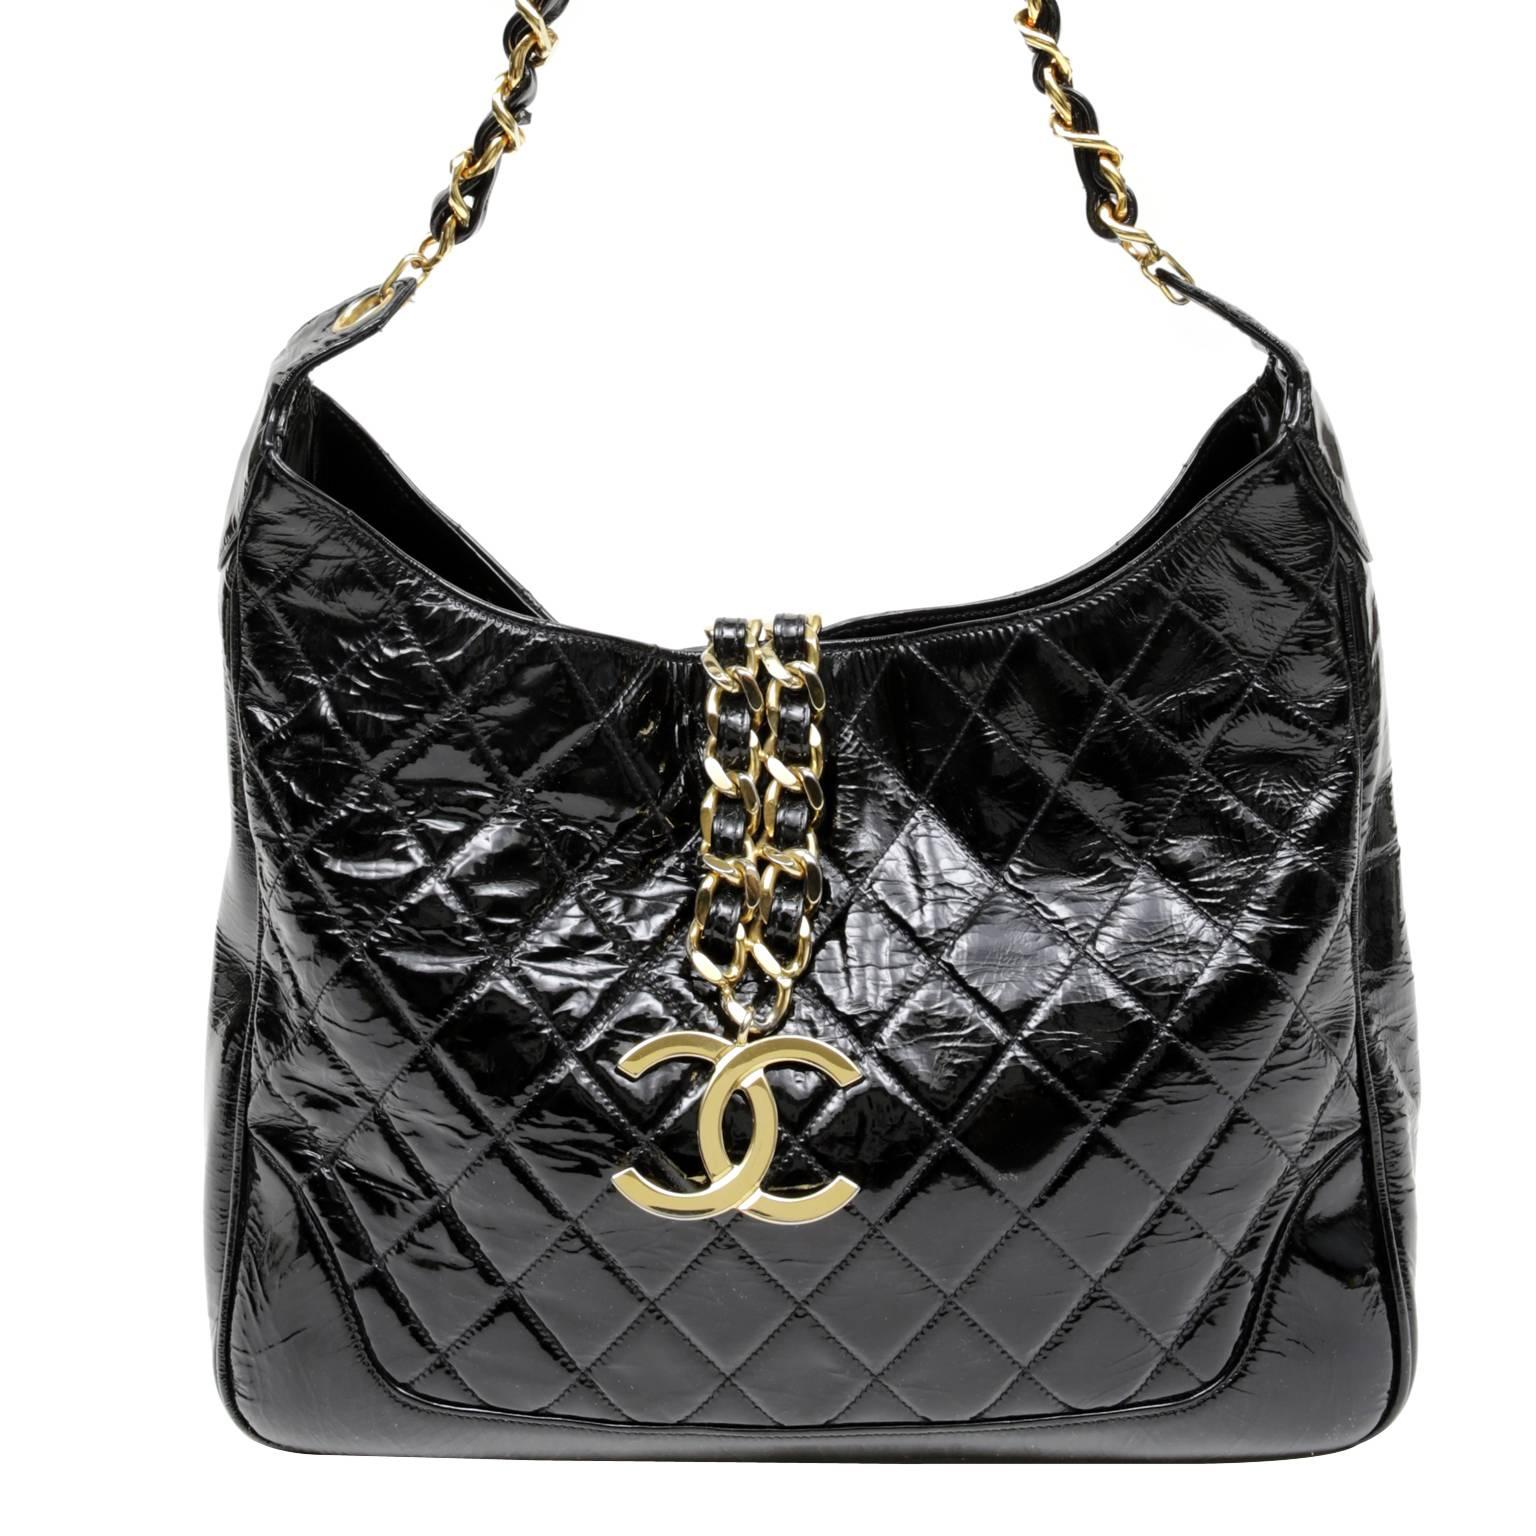 Chanel Black Patent Leather Vintage Cross Body Bag with18K Gold plated CC